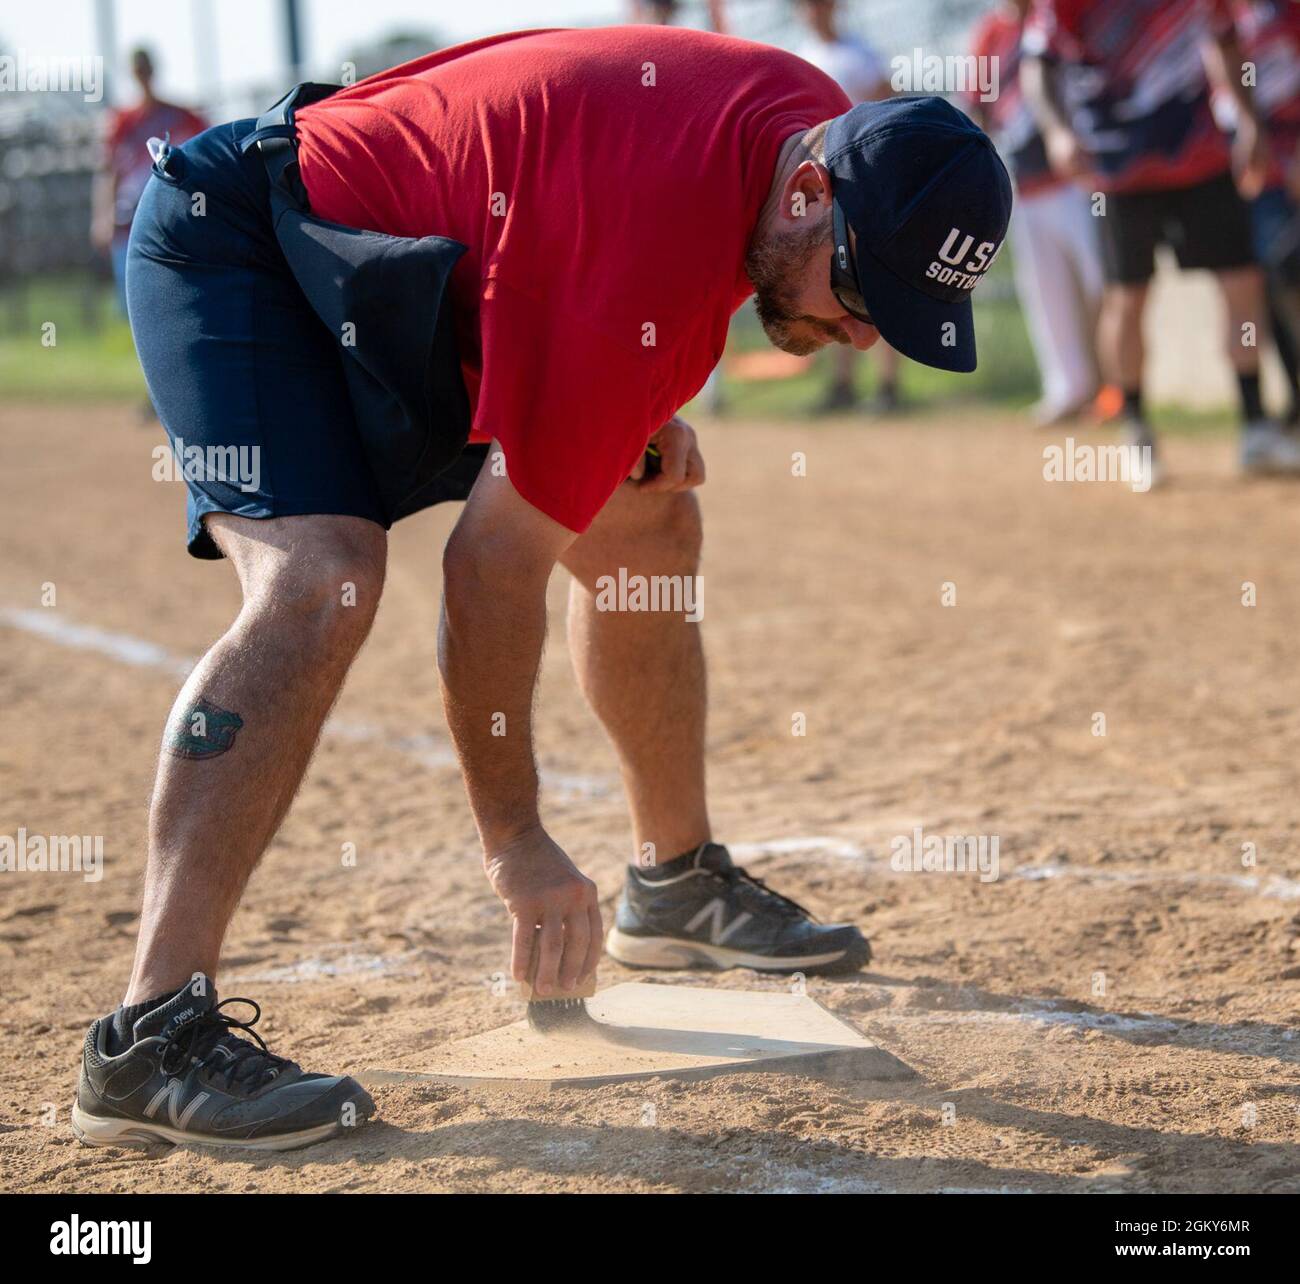 David Patch, volunteer umpire, cleans off home plate during an intramural softball game between the 436th Security Forces Squadron and the 436th Maintenance Squadron Isochronal Maintenance Dock on Dover Air Force Base, Delaware, July 26, 2021. The 436th SFS won the game 13-4. Stock Photo